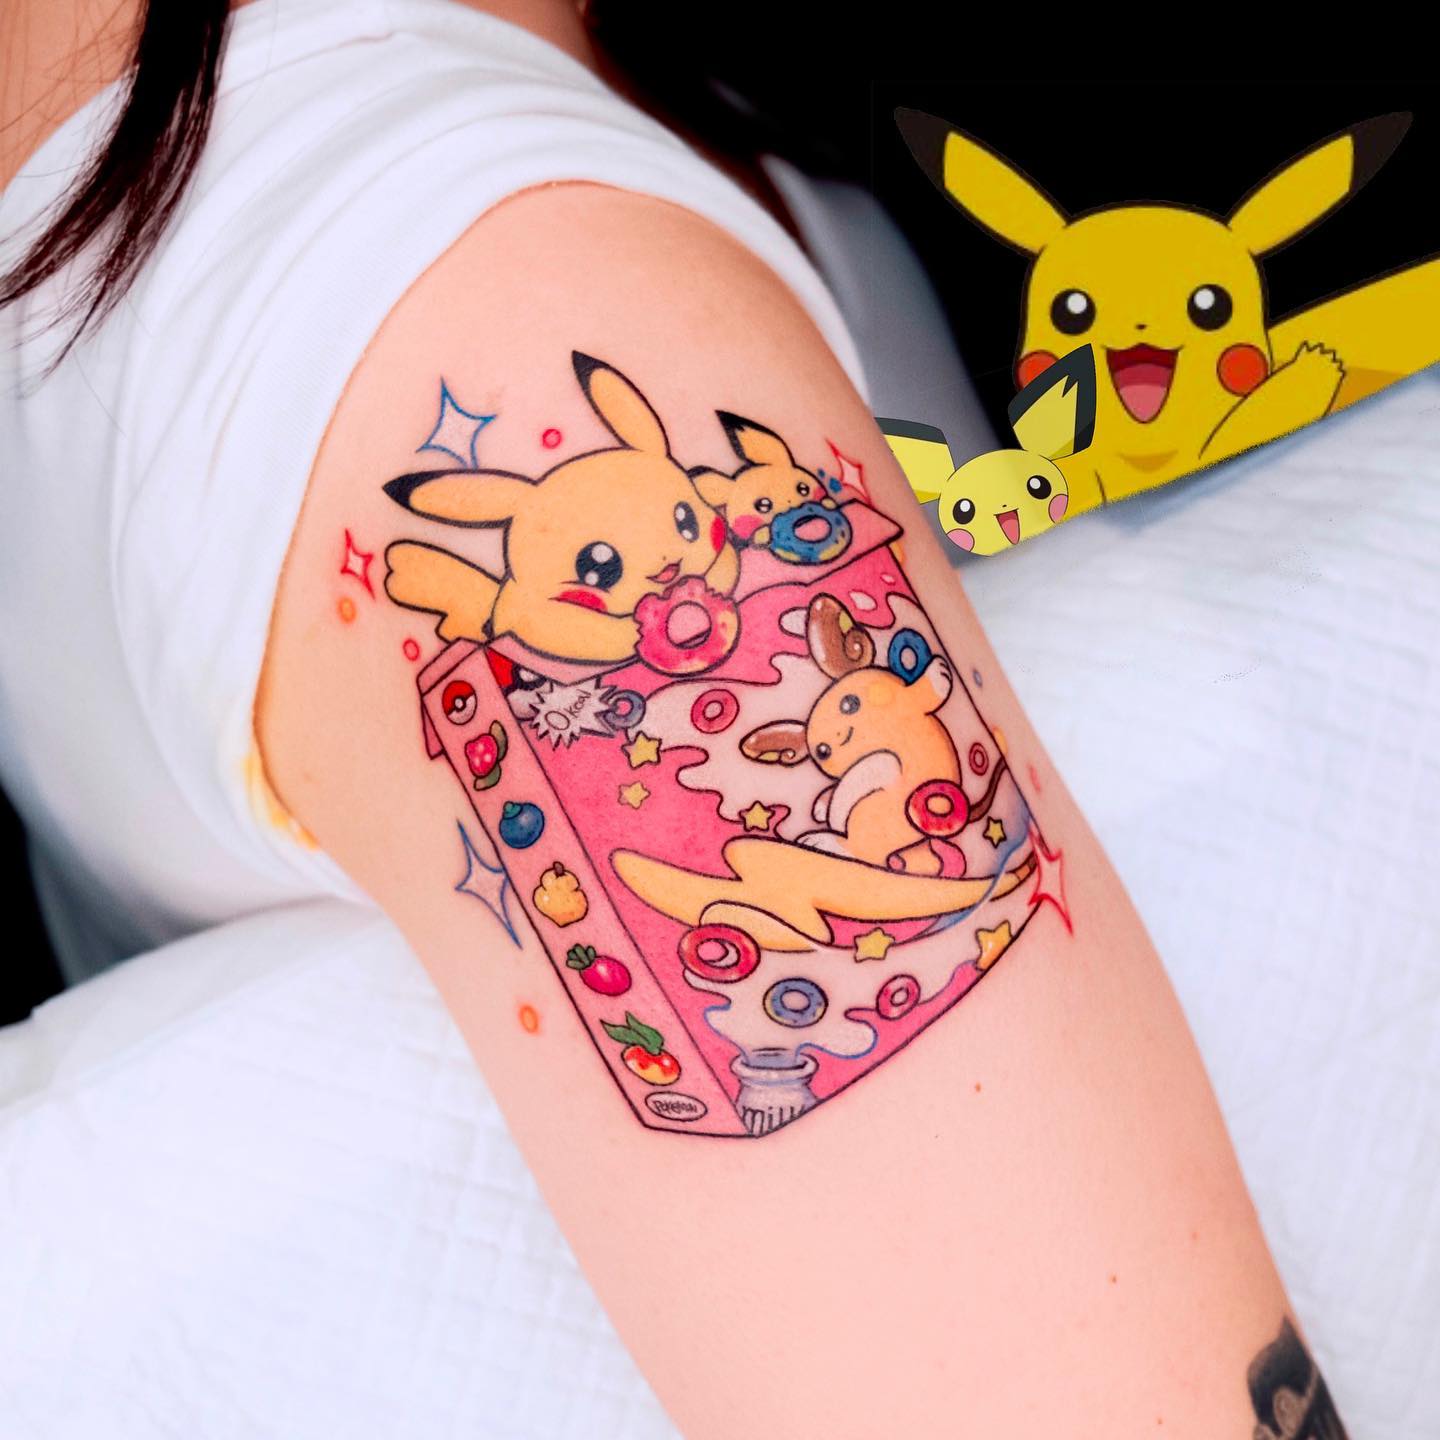 Want to get a Pokemon tattoo that is creative? We are sure that you will be one of a few people that get this tattoo because of its uniqueness. A Pokemon cereal sounds fun, doesn't it?